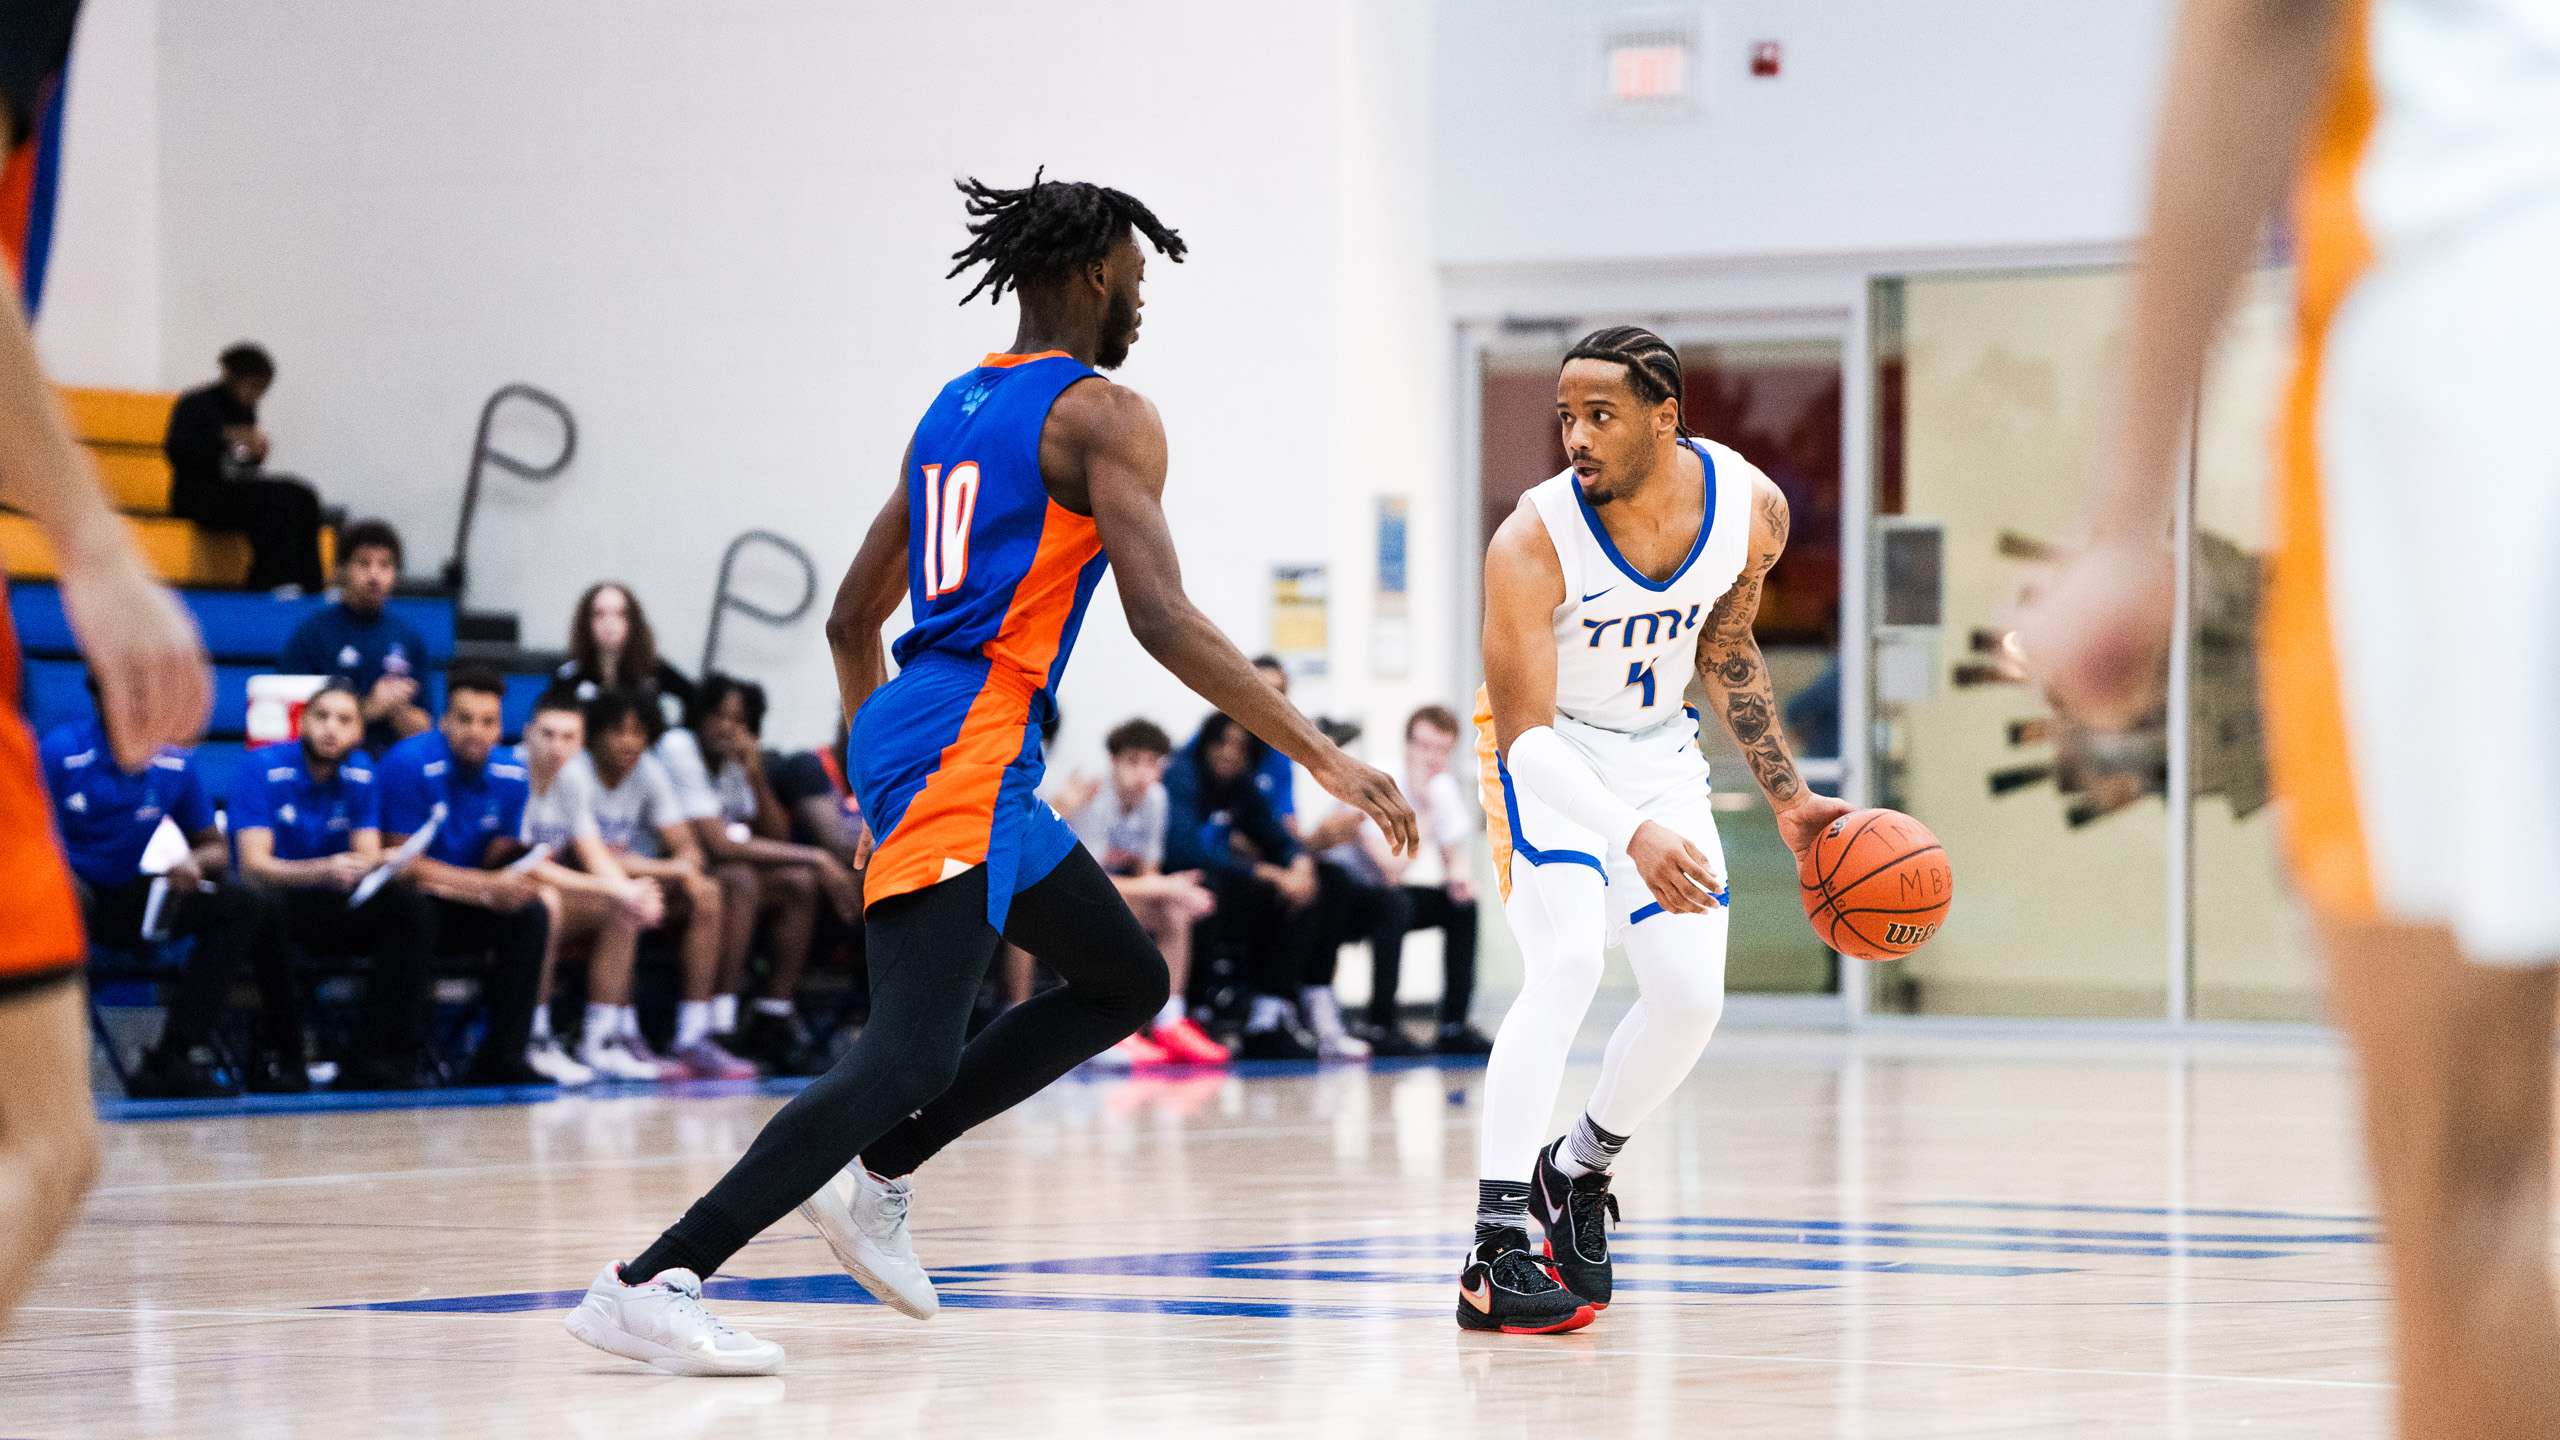 TMU men's basketball player Cameron Ramage dribbles the ball while being guarded by a Ridgebacks player